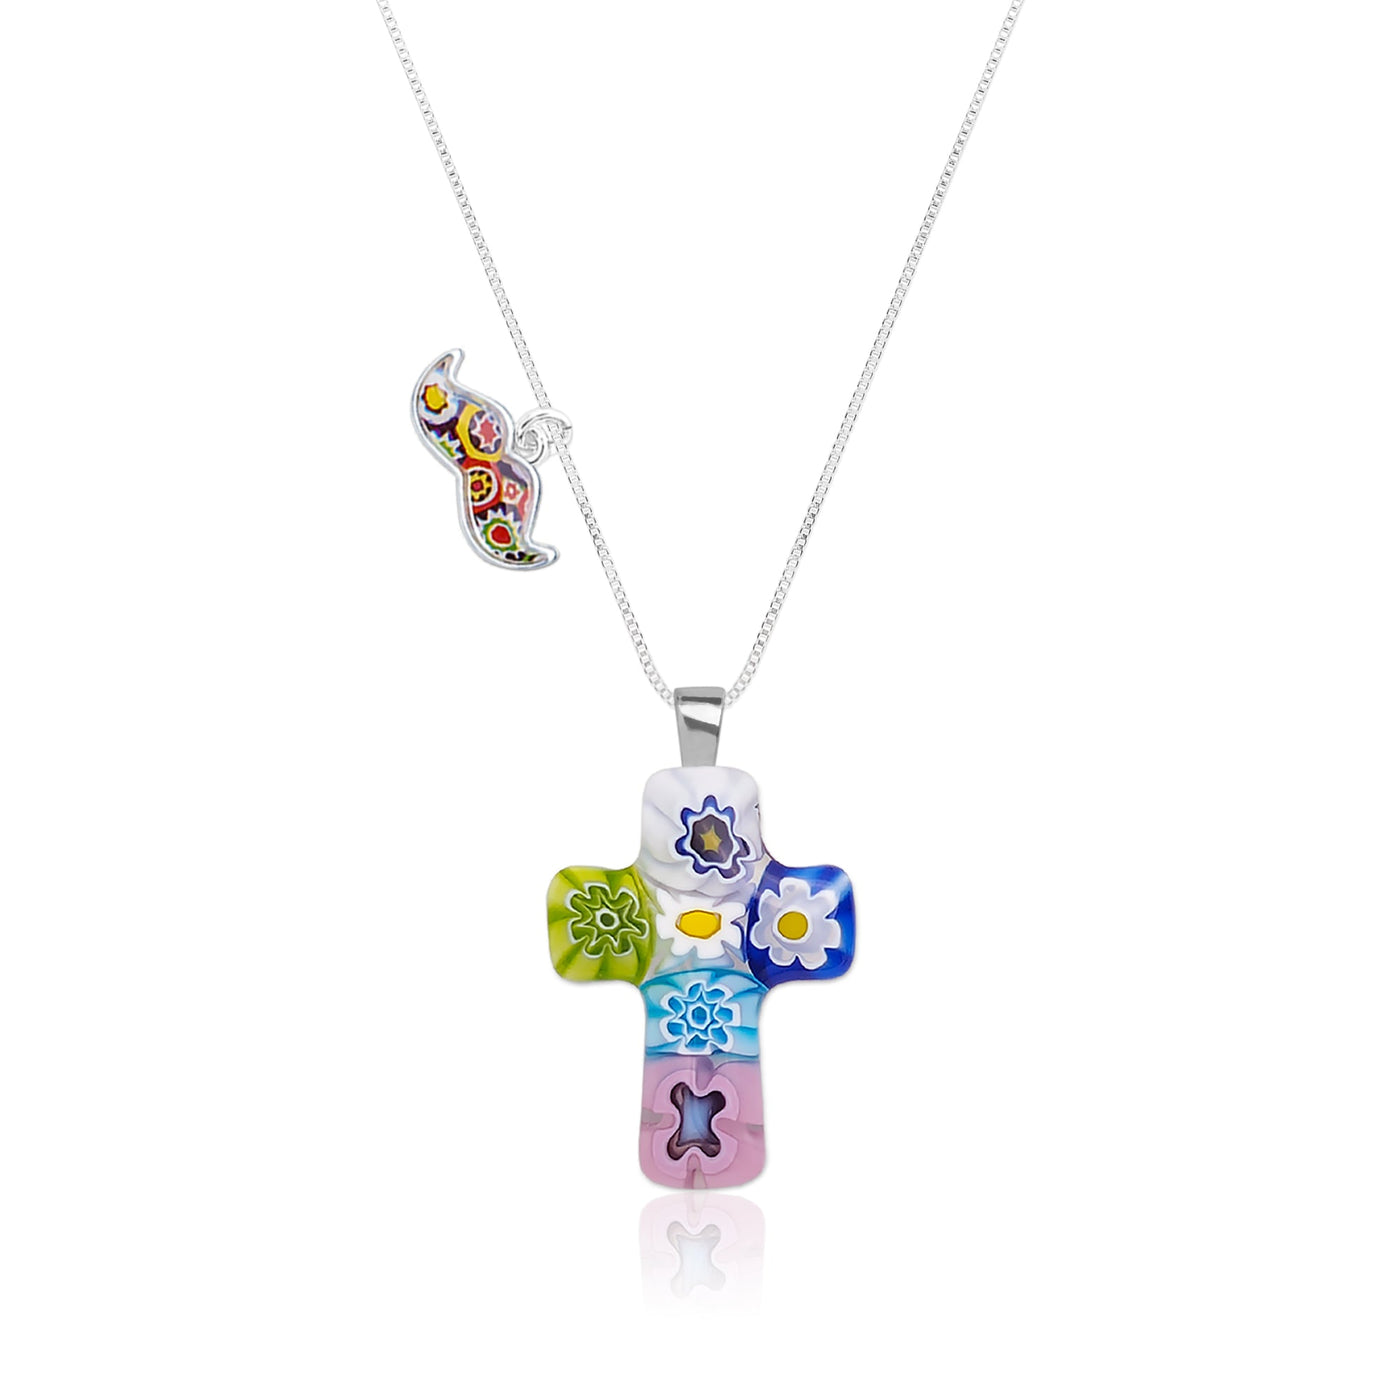 Cross in Bloom Necklace - 0.85mm 925 Sterling Silver - Pendant Necklace